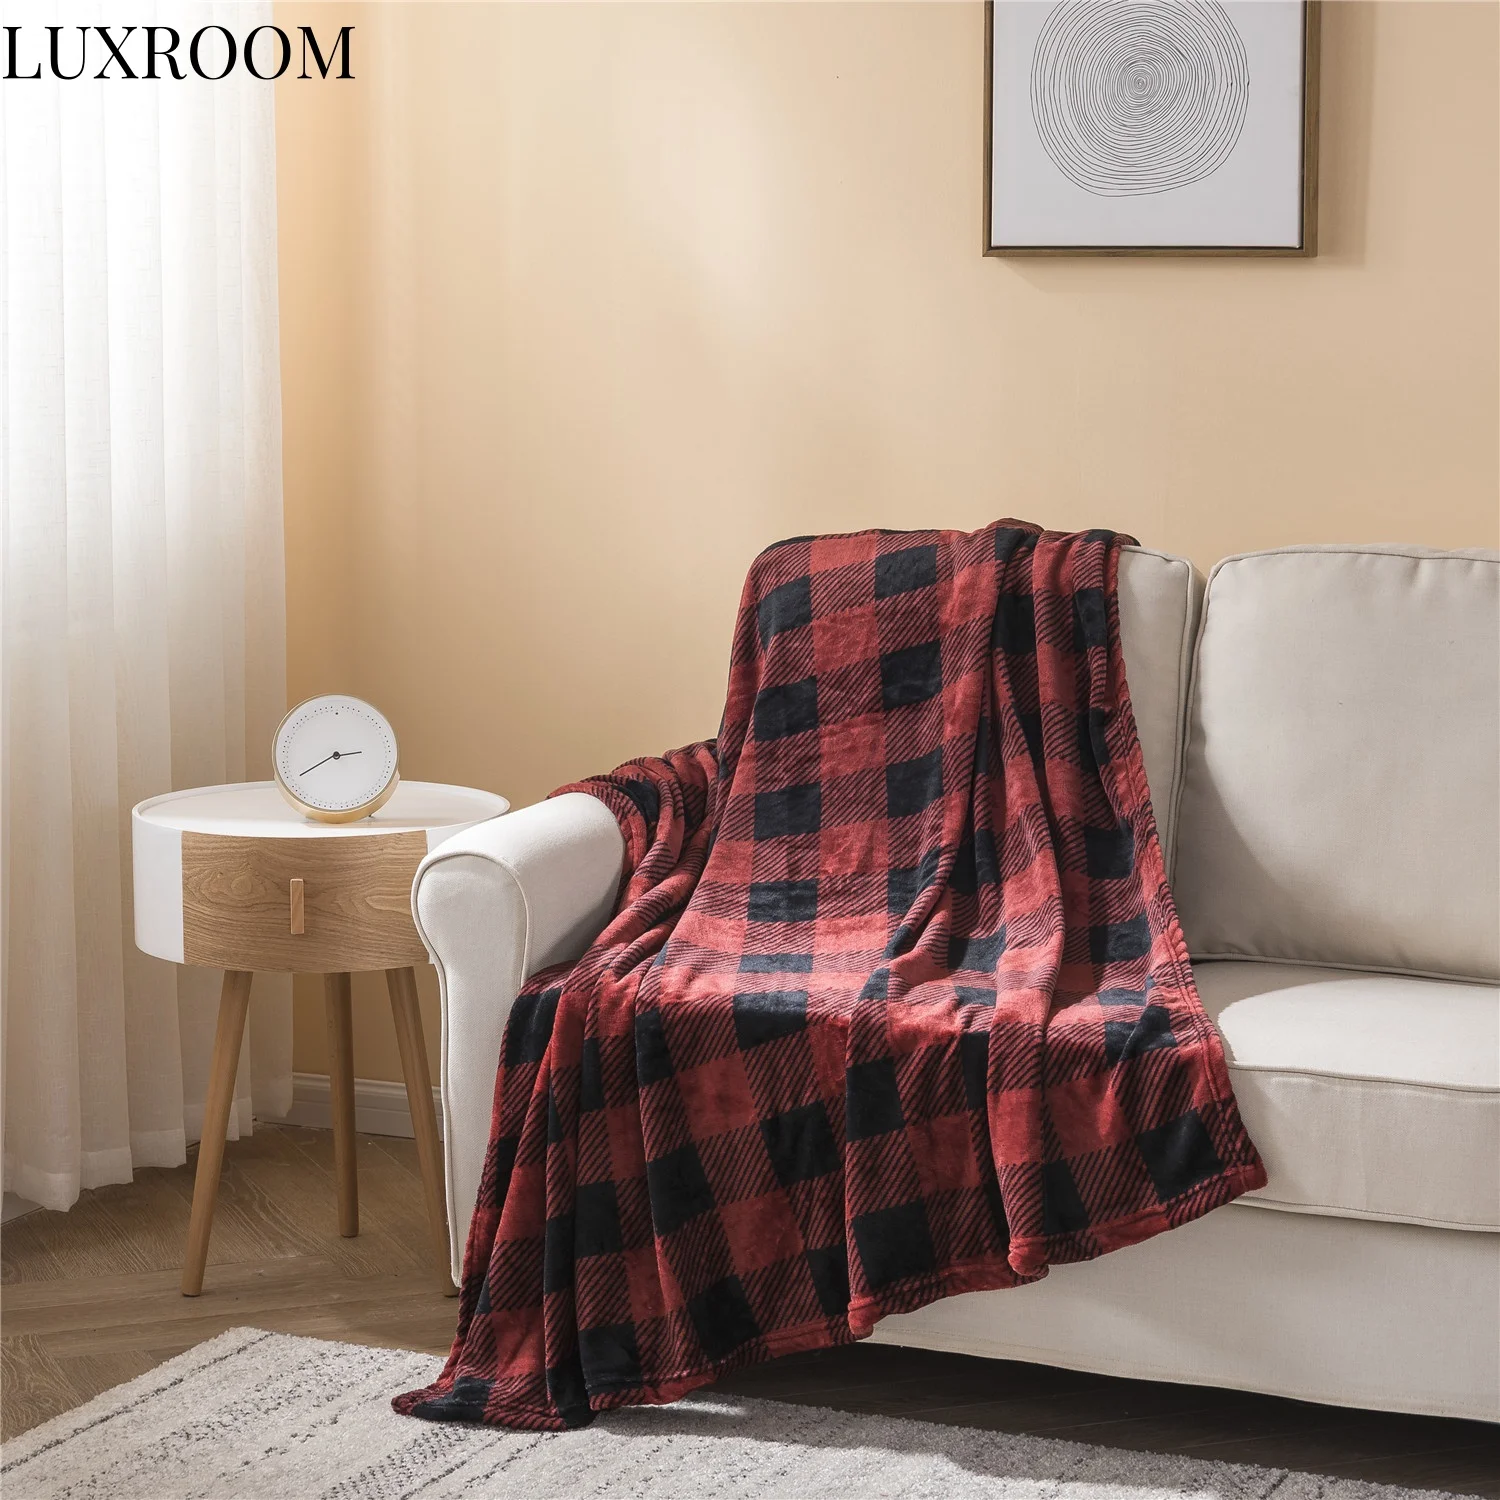 

Throw Blanket For Beds Winter Plaid Sofa Embossed Soft Coral Fleece Fabric Picnic Printed Customed Envelope Letter Comfortable